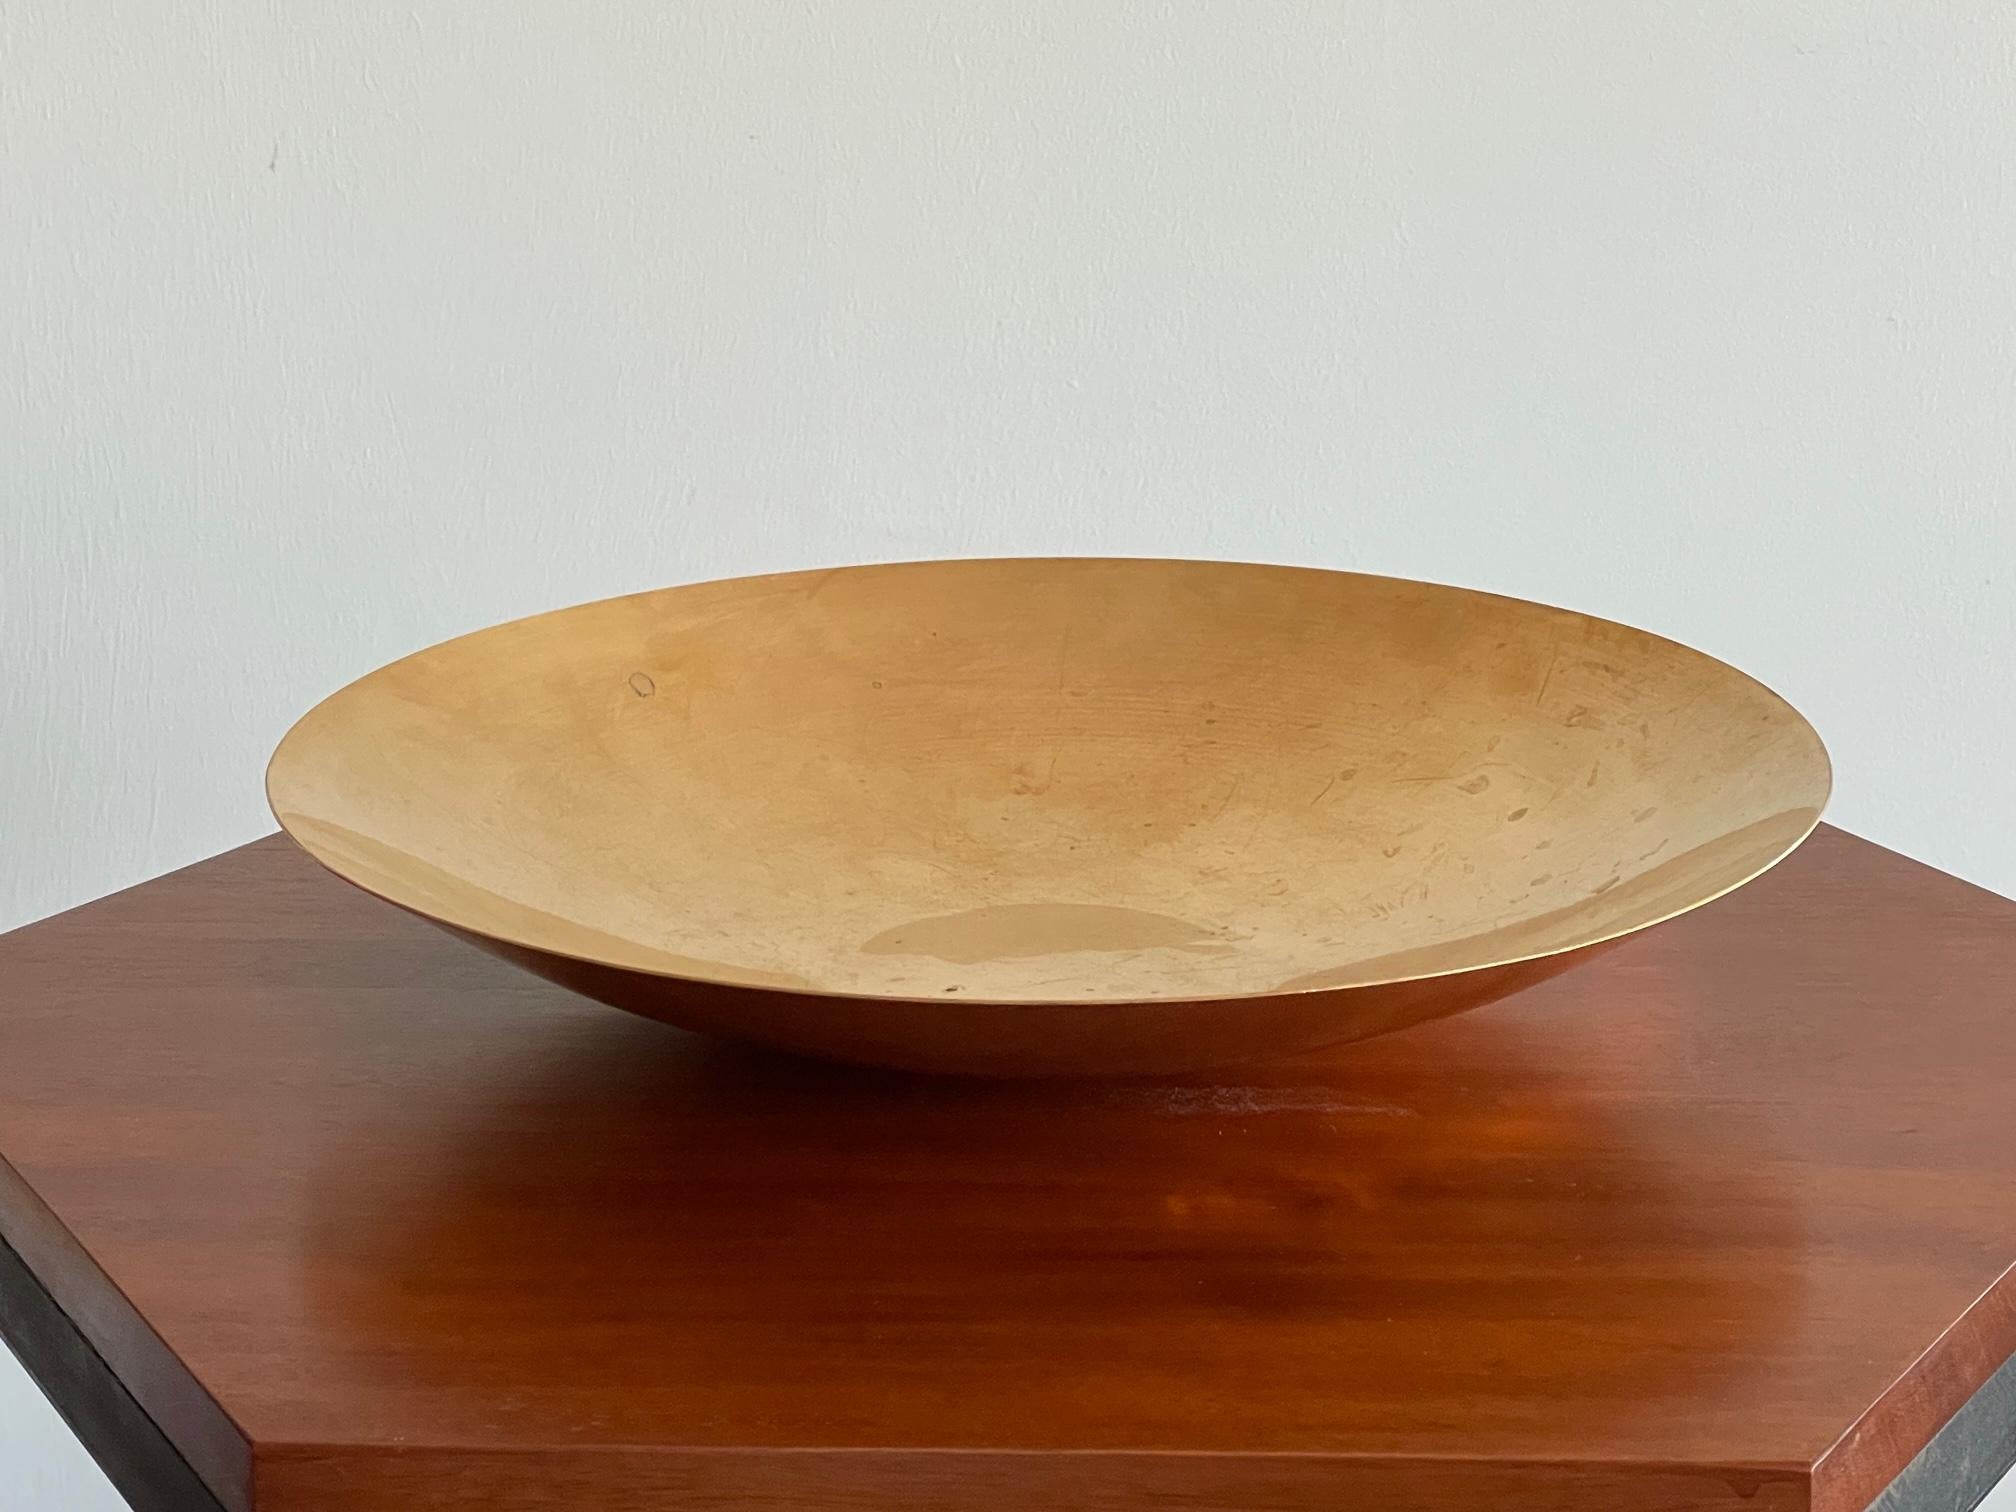 A handmade brass bowl by jeweler and silversmith Ronald Pearson. This is a large one measuring 13.5